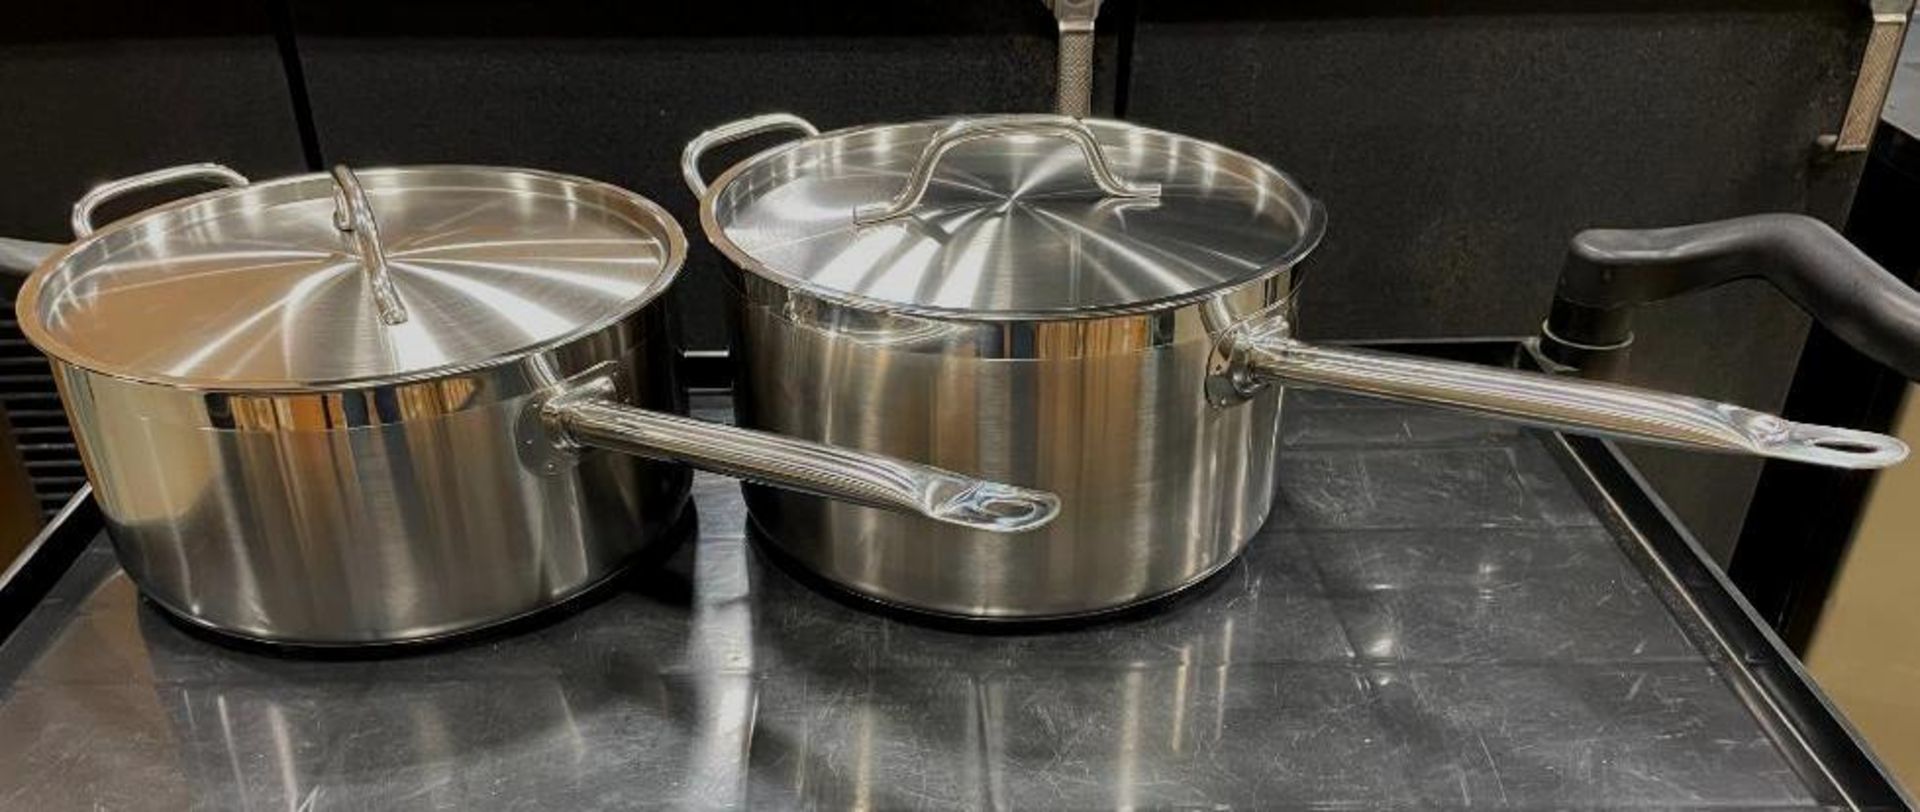 10QT & 7.5QT HEAVY DUTY STAINLESS SAUCE PAN INDUCTION CAPABLE, JR 47702, 47682 - NEW - Image 2 of 3